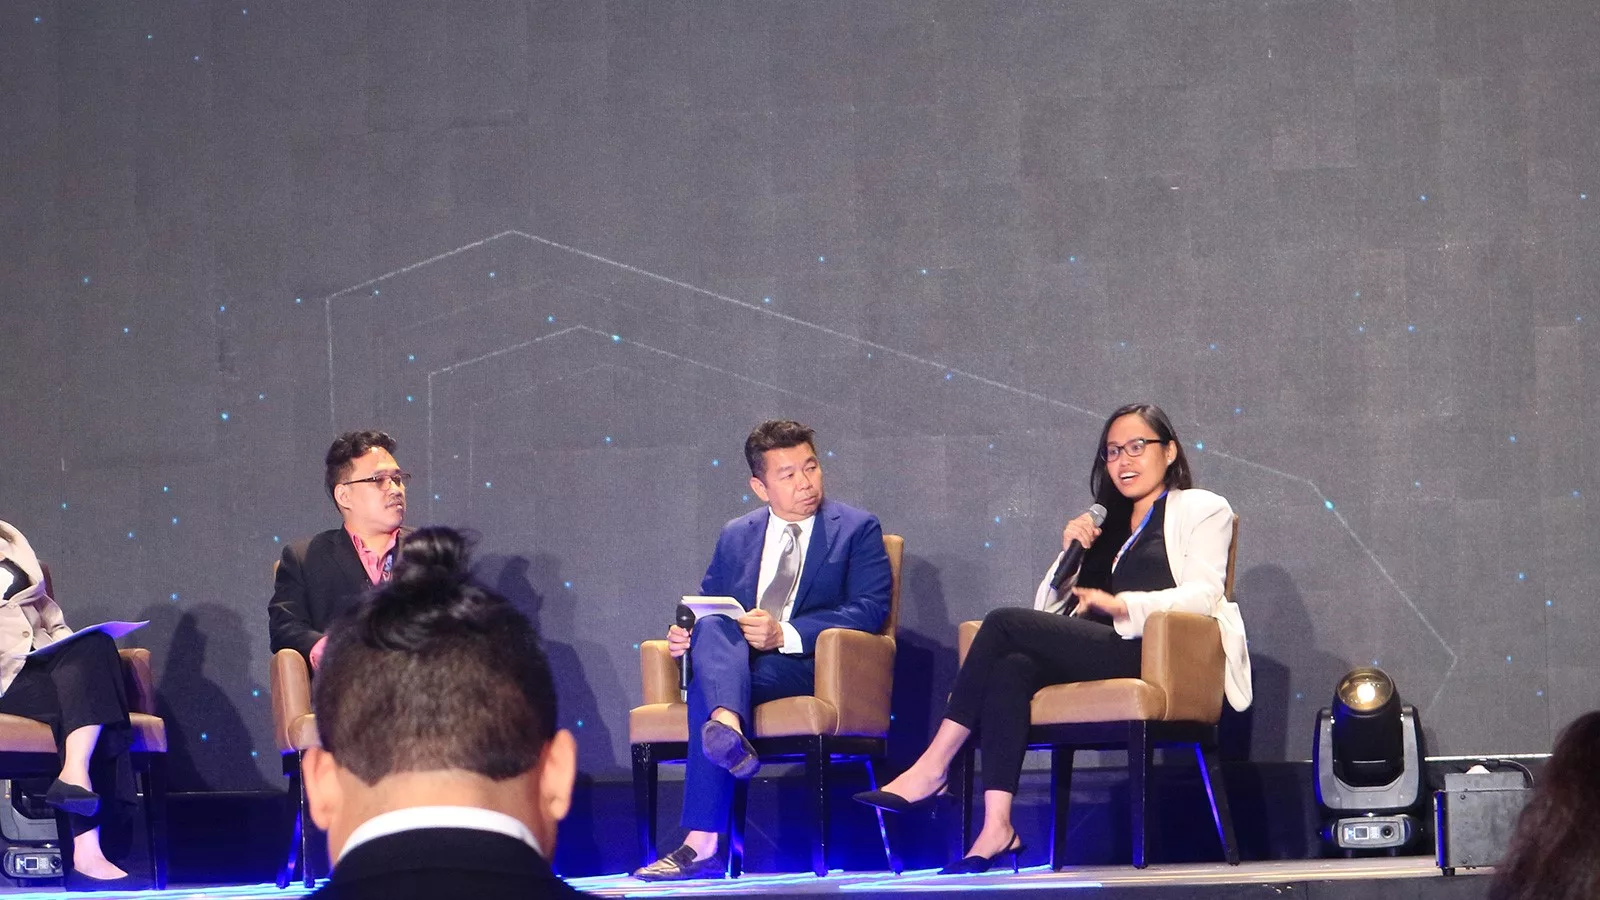 In Picture: Lei Motilla discusses breaking gender gaps in the AI sector